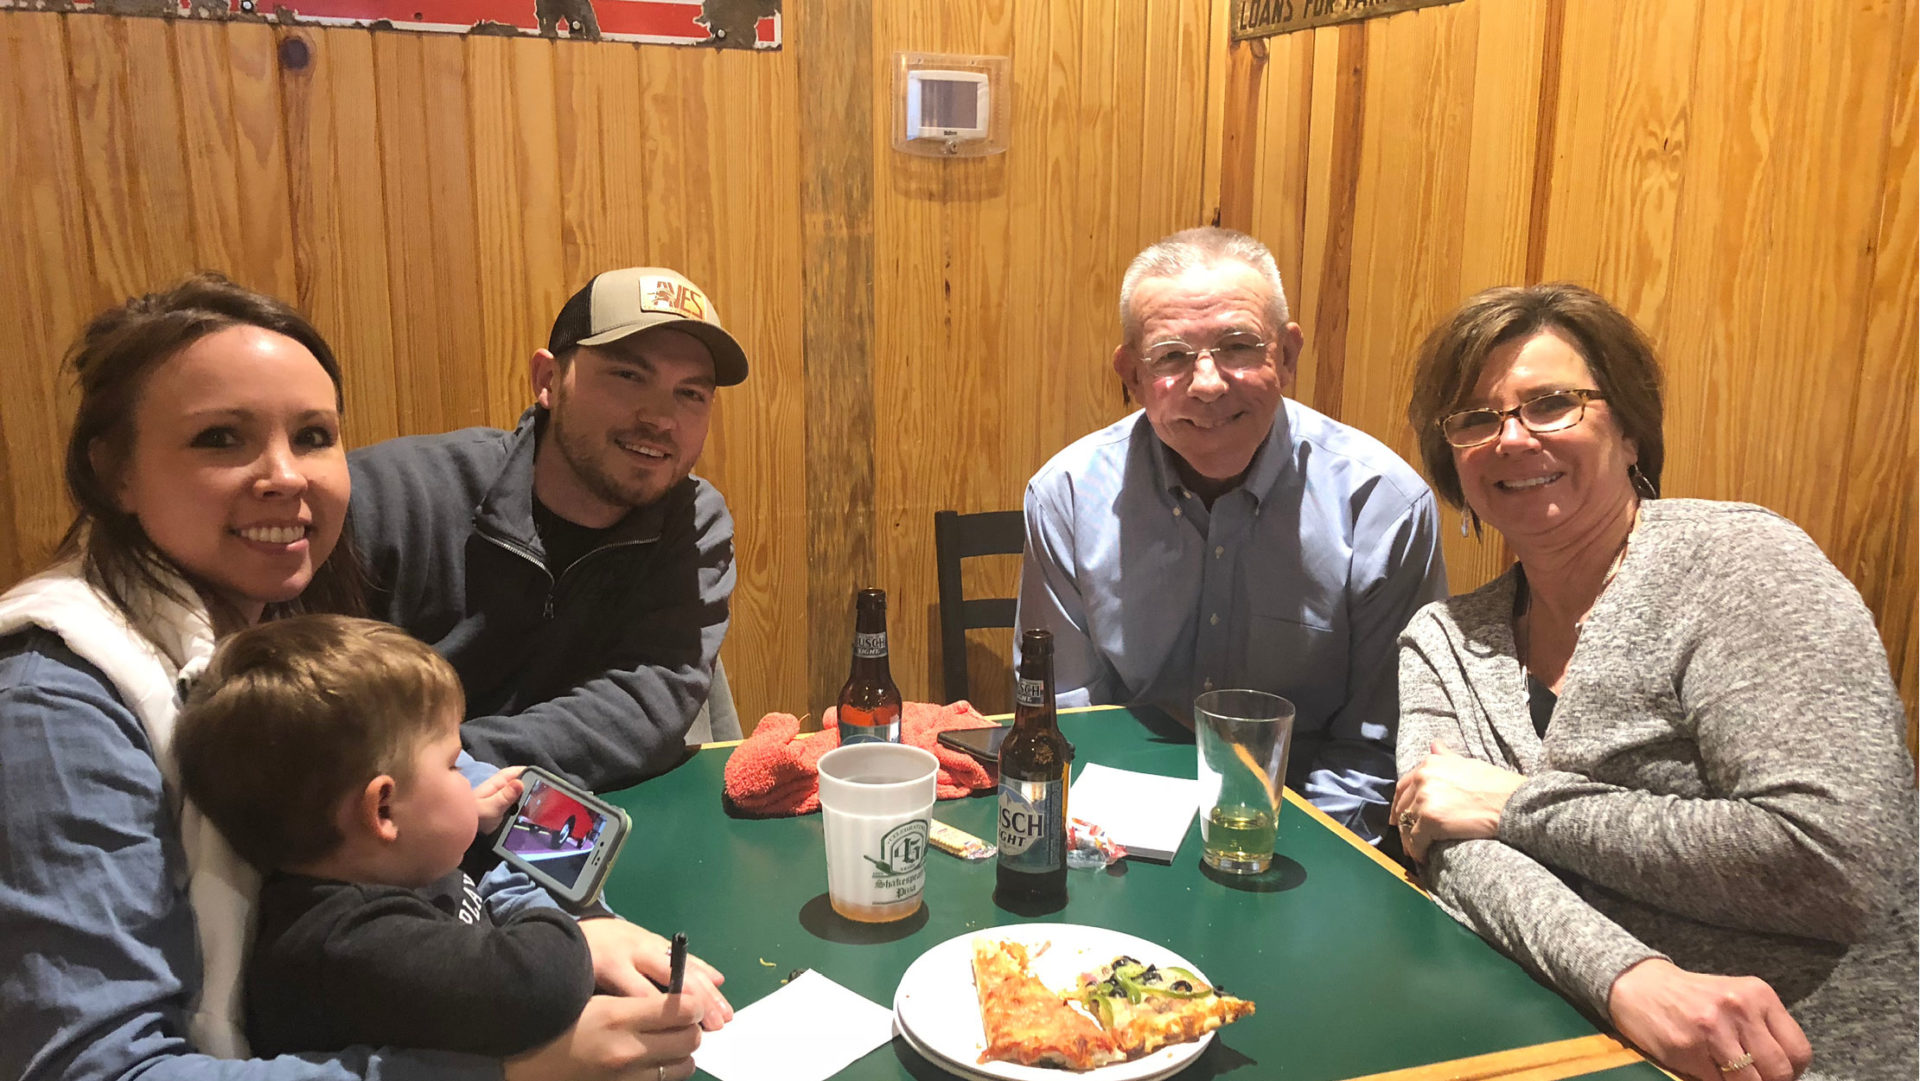 In an effort to raise money for the JES Holdings Rootin’ Tootin’ Chili Cookoff team, the Columbia office held a Trivia Night fundraiser on Tuesday, February 5th at Shakespeare’s Pizza.